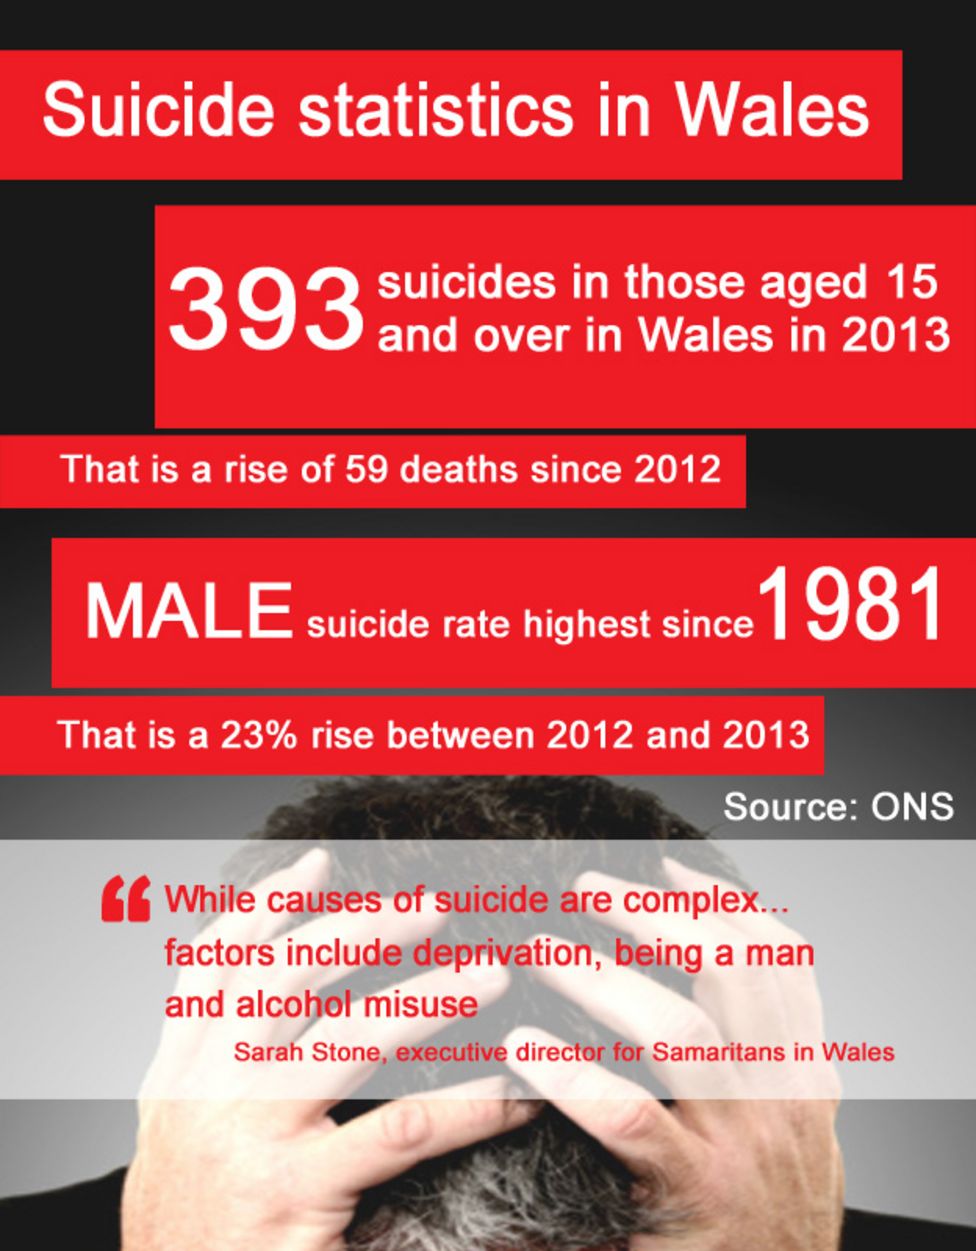 Suicide rate for men in Wales 'highest since 1981' BBC News